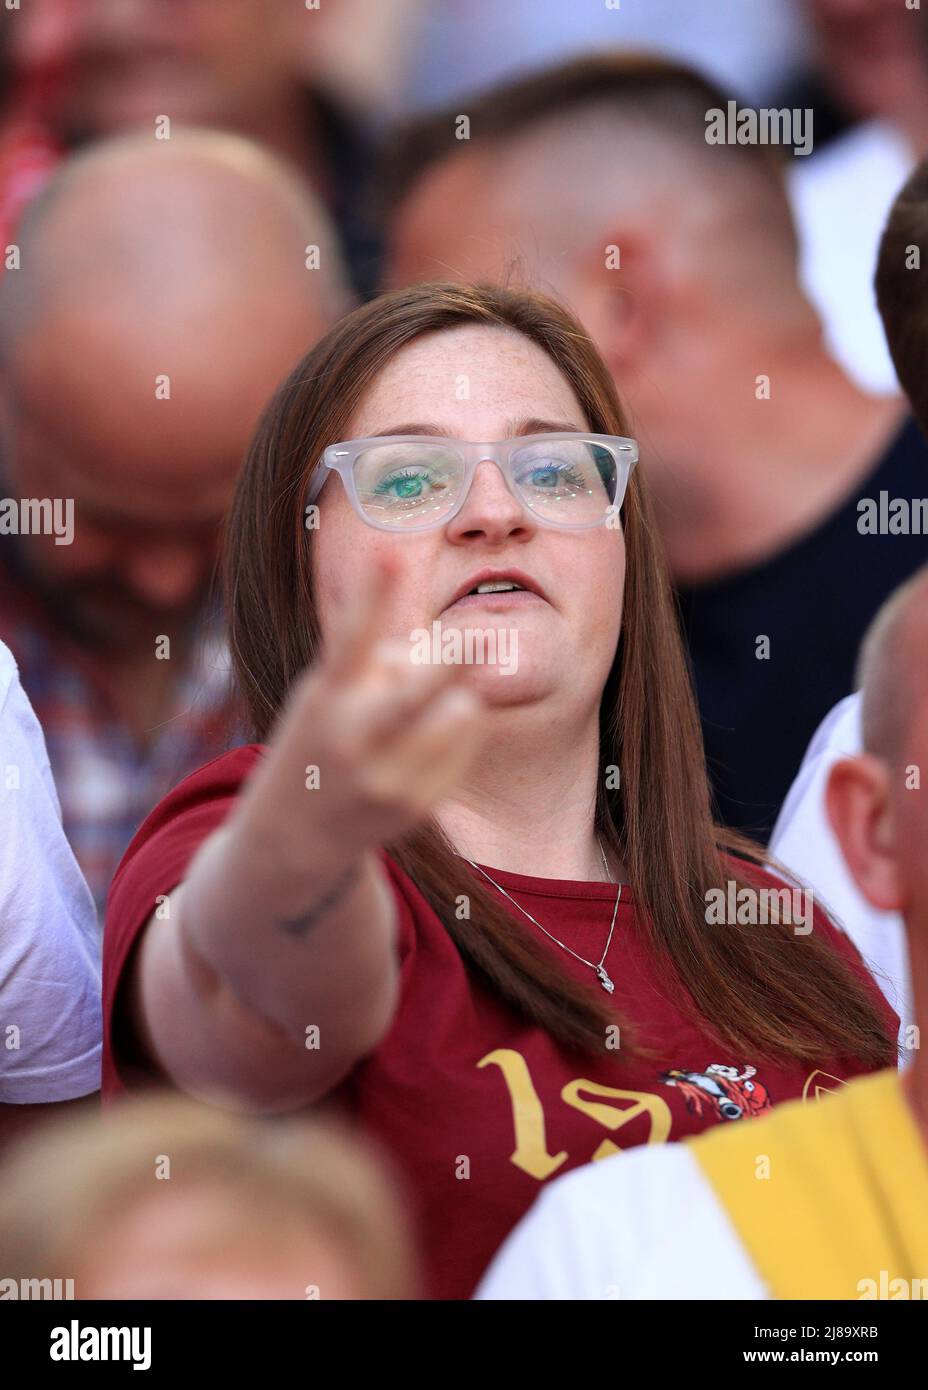 14th May 2022 ; Wembley Stadium, London England; FA Cup Final, Chelsea versus Liverpool: Liverpool fan gesturing rudely as the national anthem of the United Kingdom is played Stock Photo